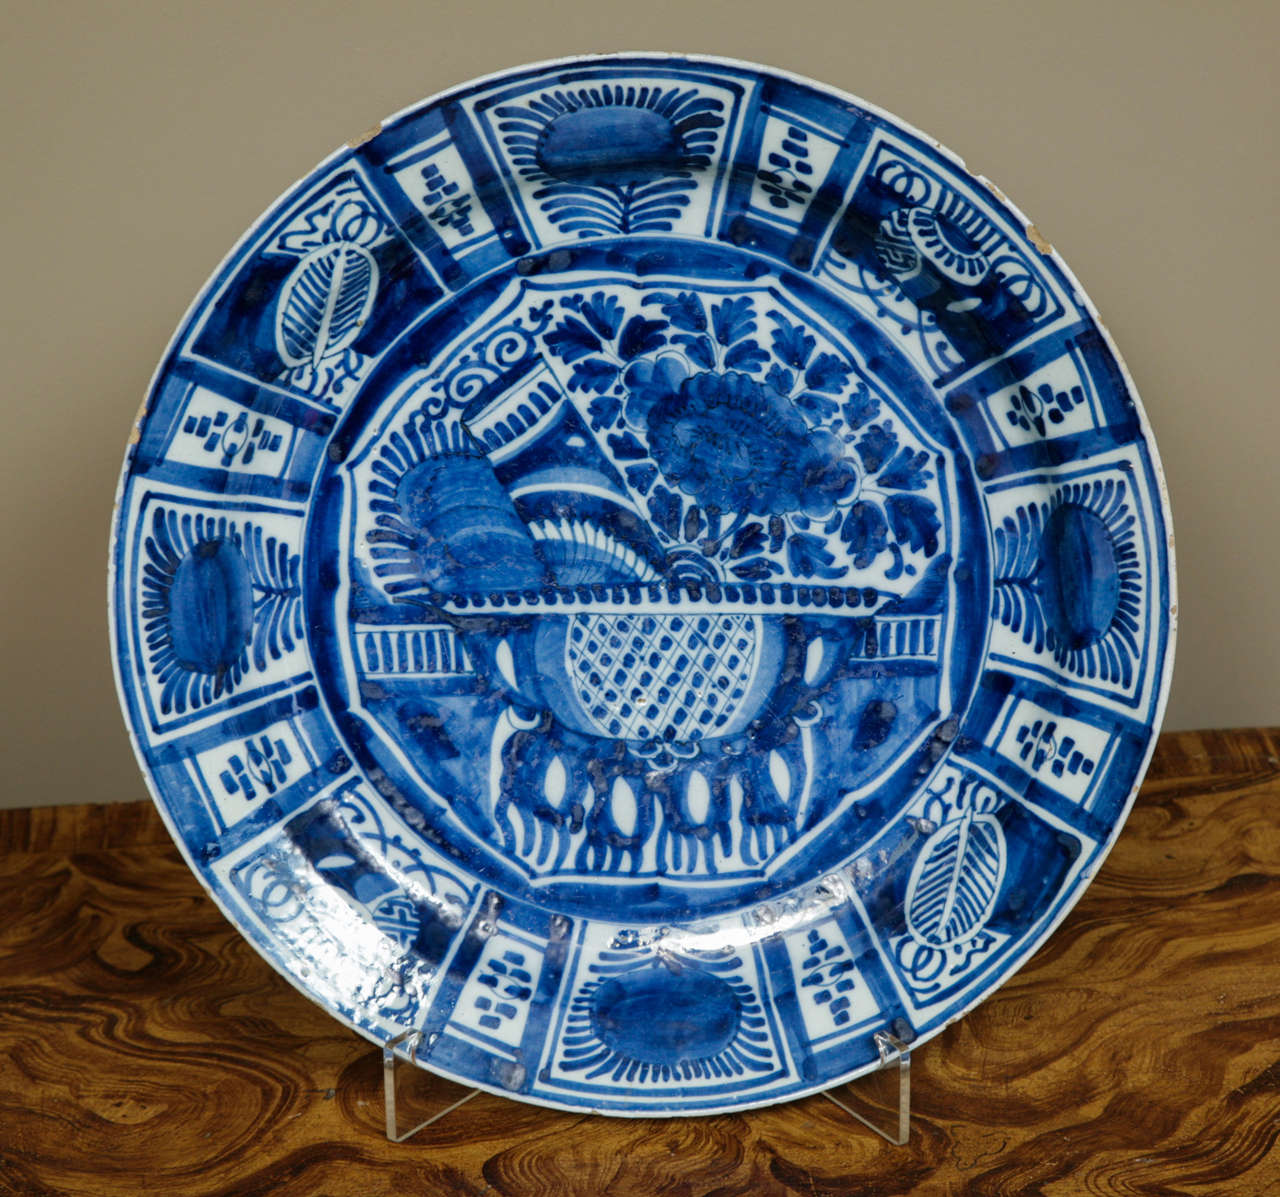 A mid 18th century Delft blue and white charger painted in the kraak style, a bowl containing flowers, a gourd and a scroll central to radiating panels of Buddhist objects alternating with flowers. Very dark cobalt blue palette. Diameter 13.75 (35